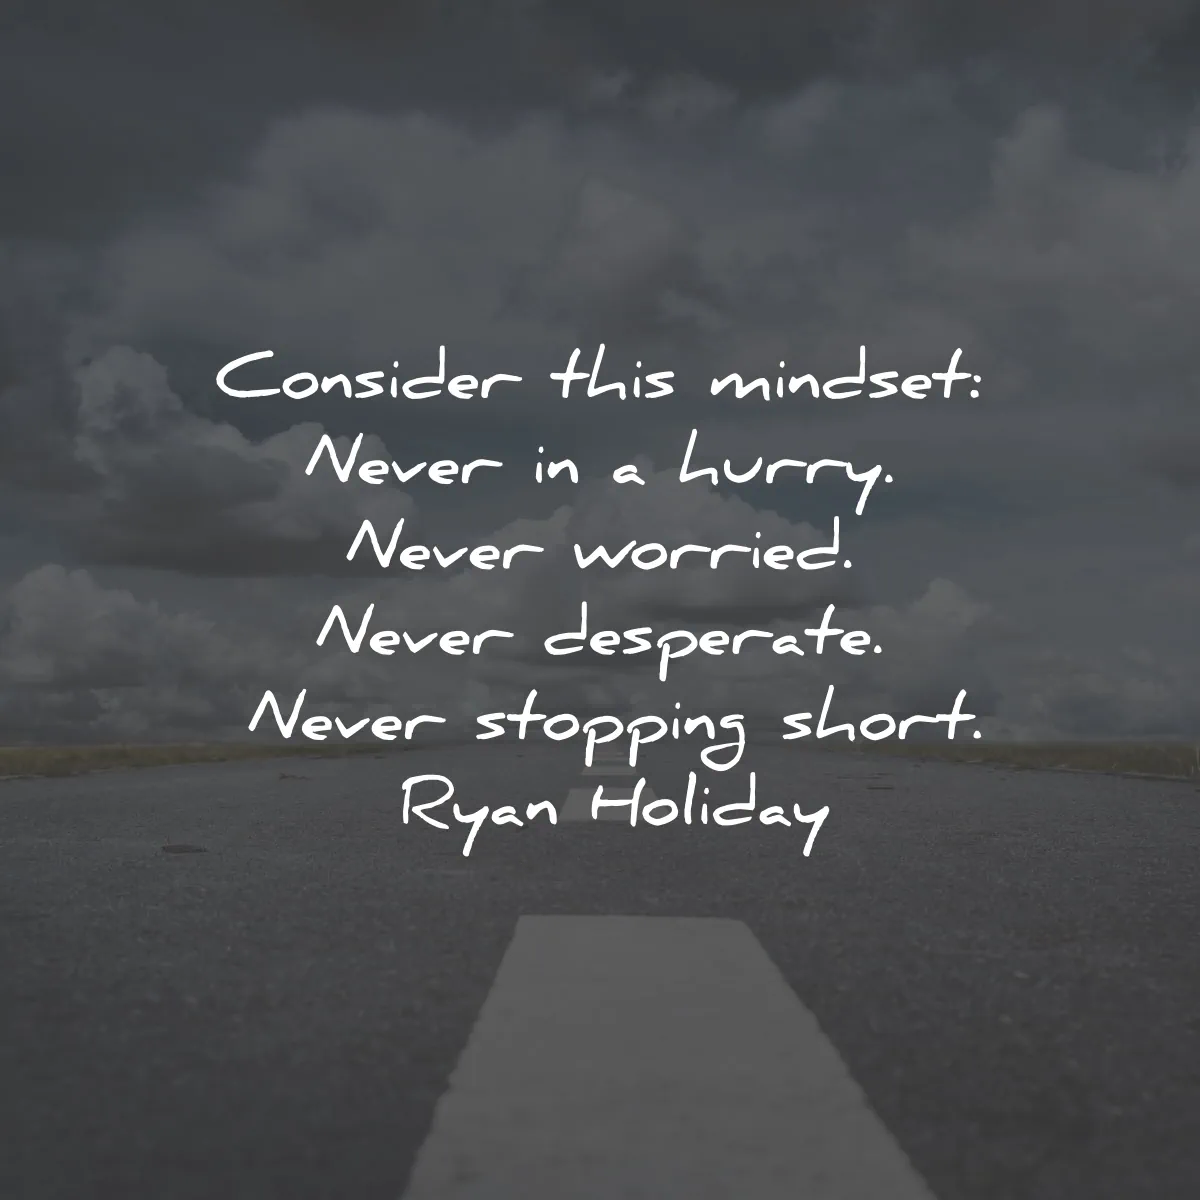 the obstacle is the way quotes summary ryan holiday consider mindset never hurry stopping short wisdom